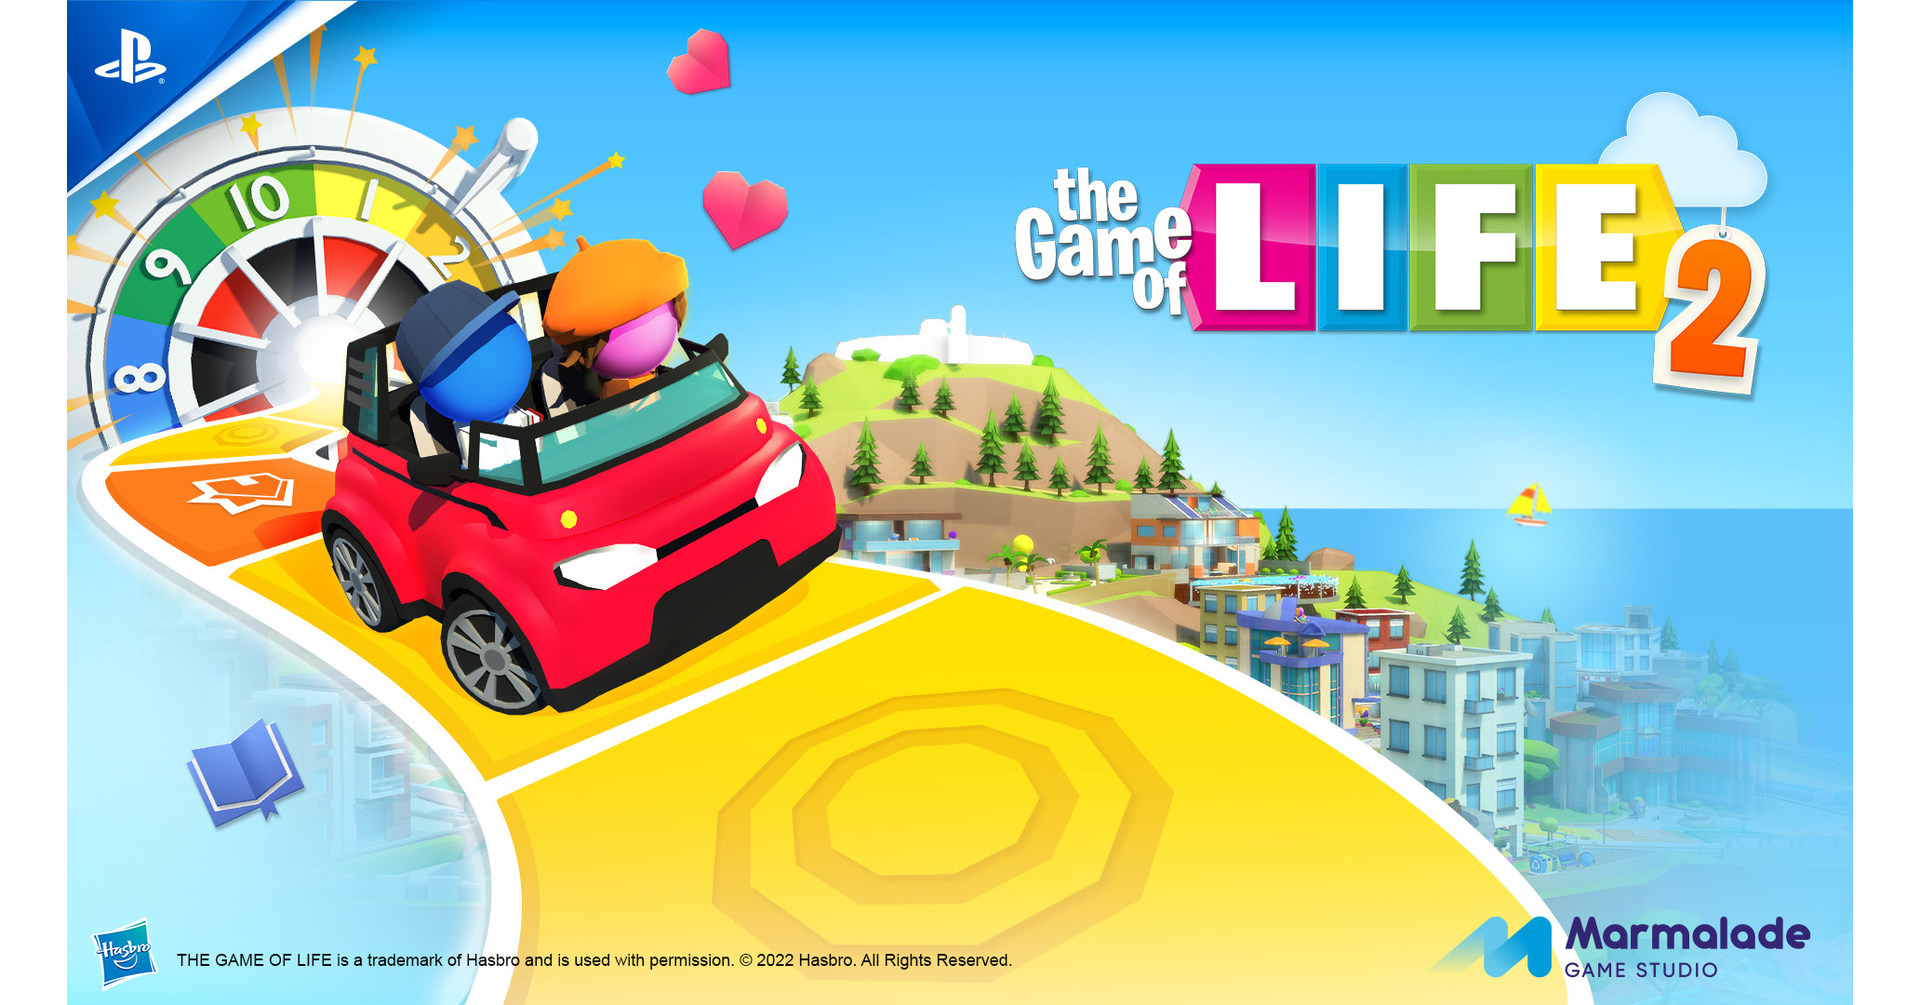 DAILY LIFE 2 free online game on